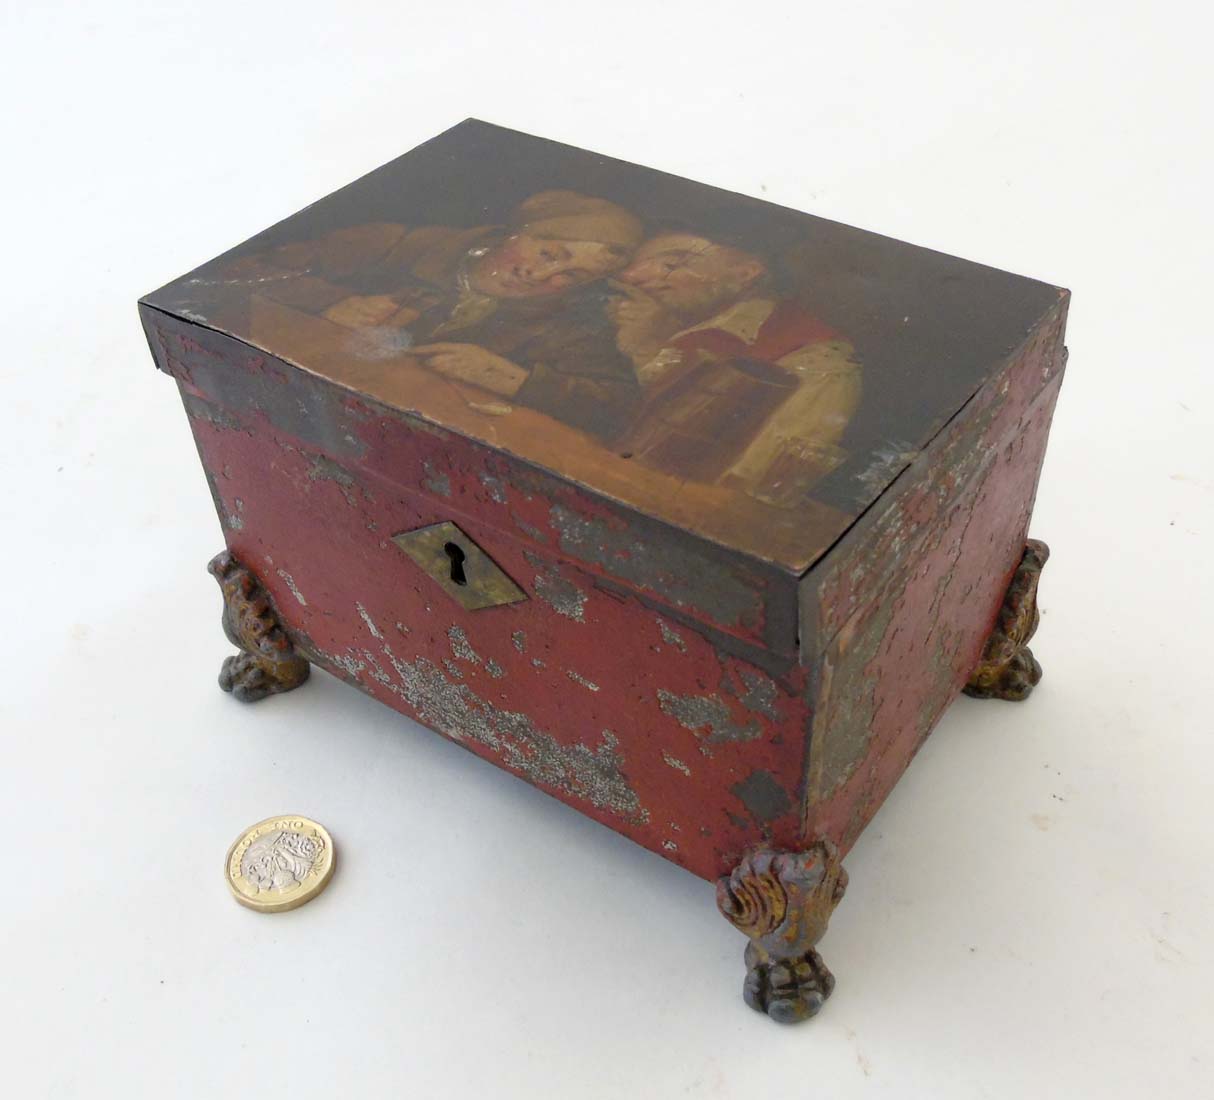 A 19thC tolepeint topped painted Dutch teacaddy 5 5/8" wide x 3 3/4" high CONDITION: